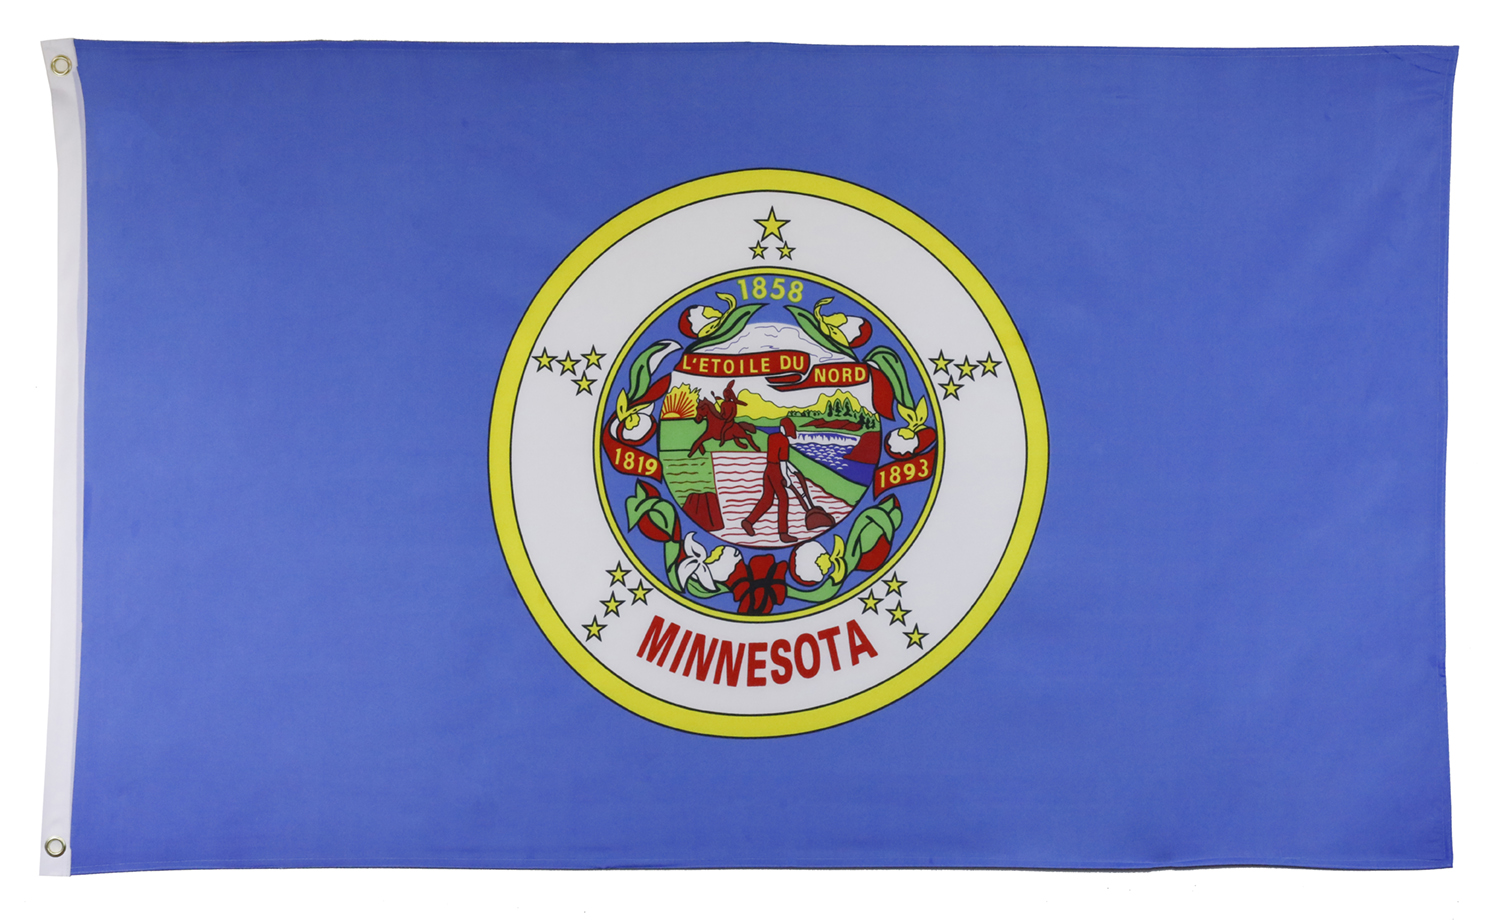 Shop72 - High Quality US State Flags - 100D 3x5 Polyester Flags - Minnesota One Size